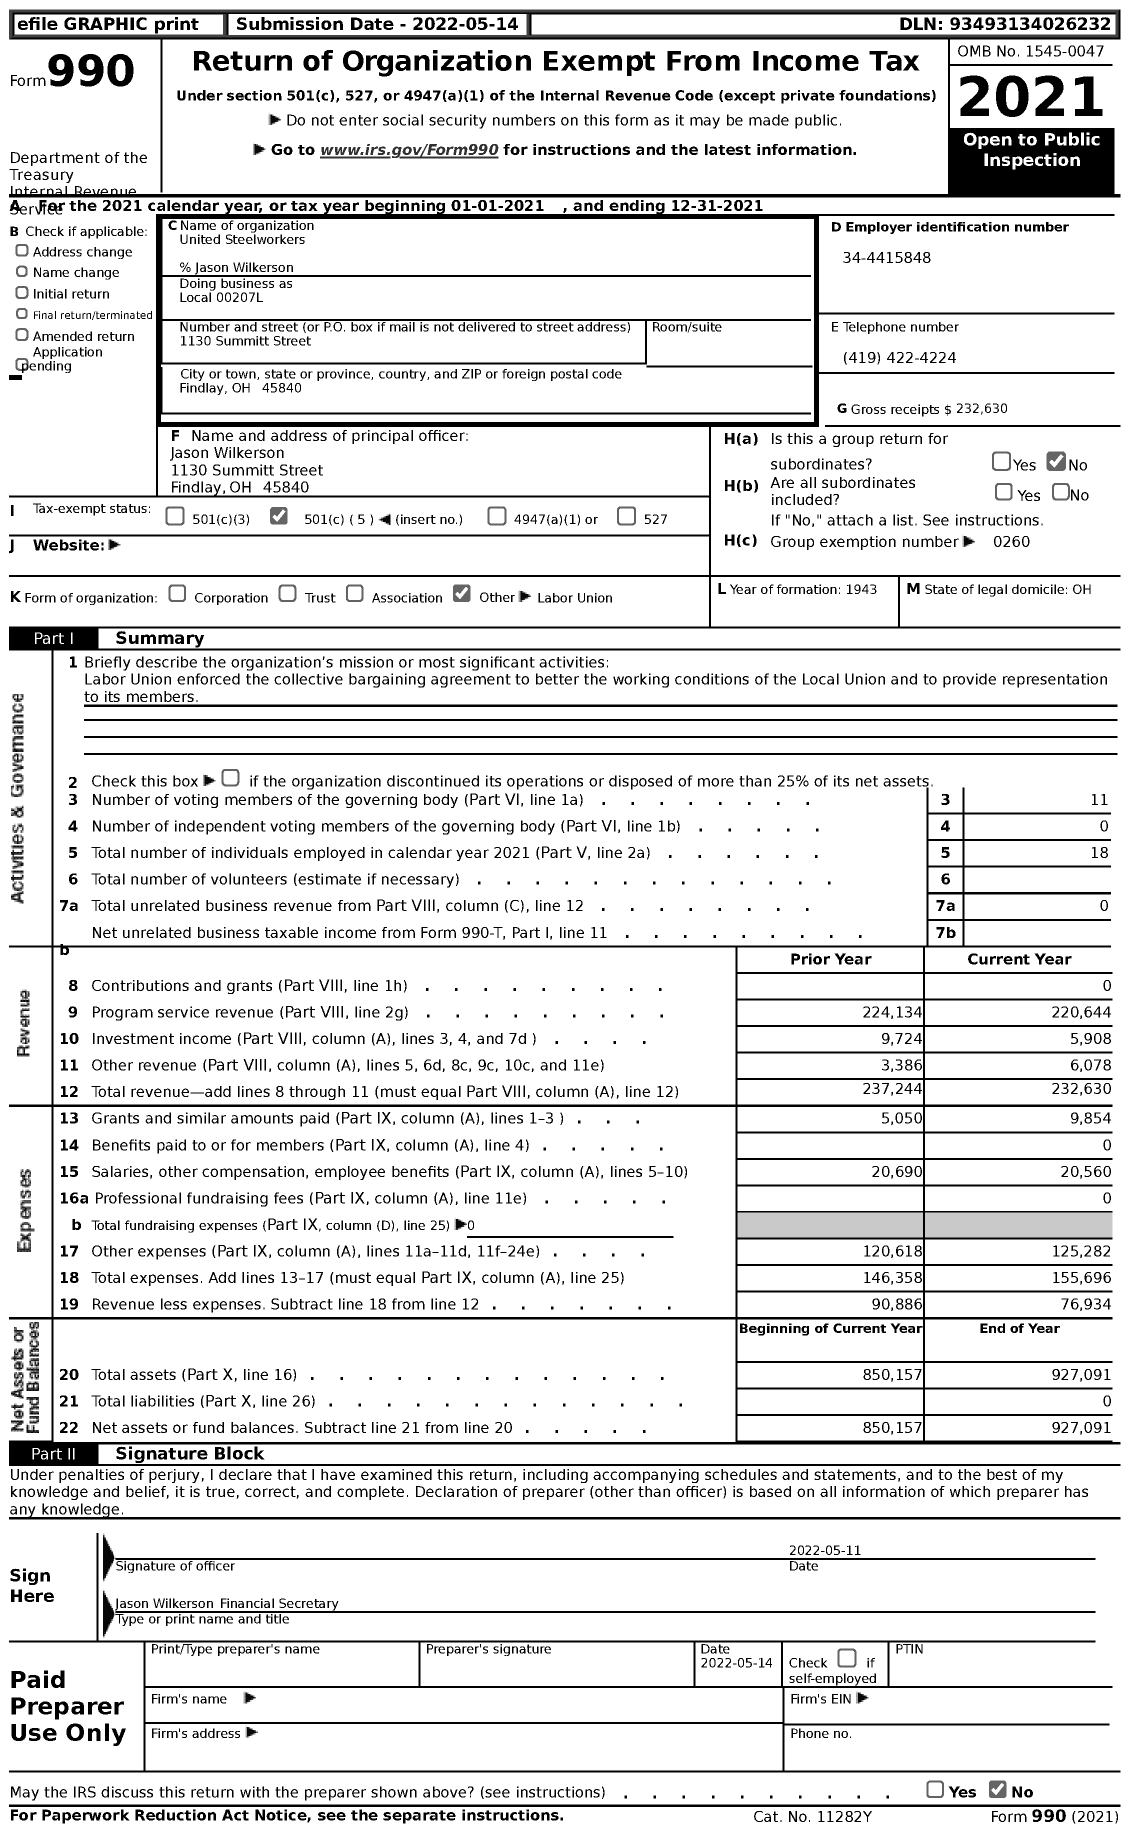 Image of first page of 2021 Form 990 for United Steelworkers - Local Union 00207L